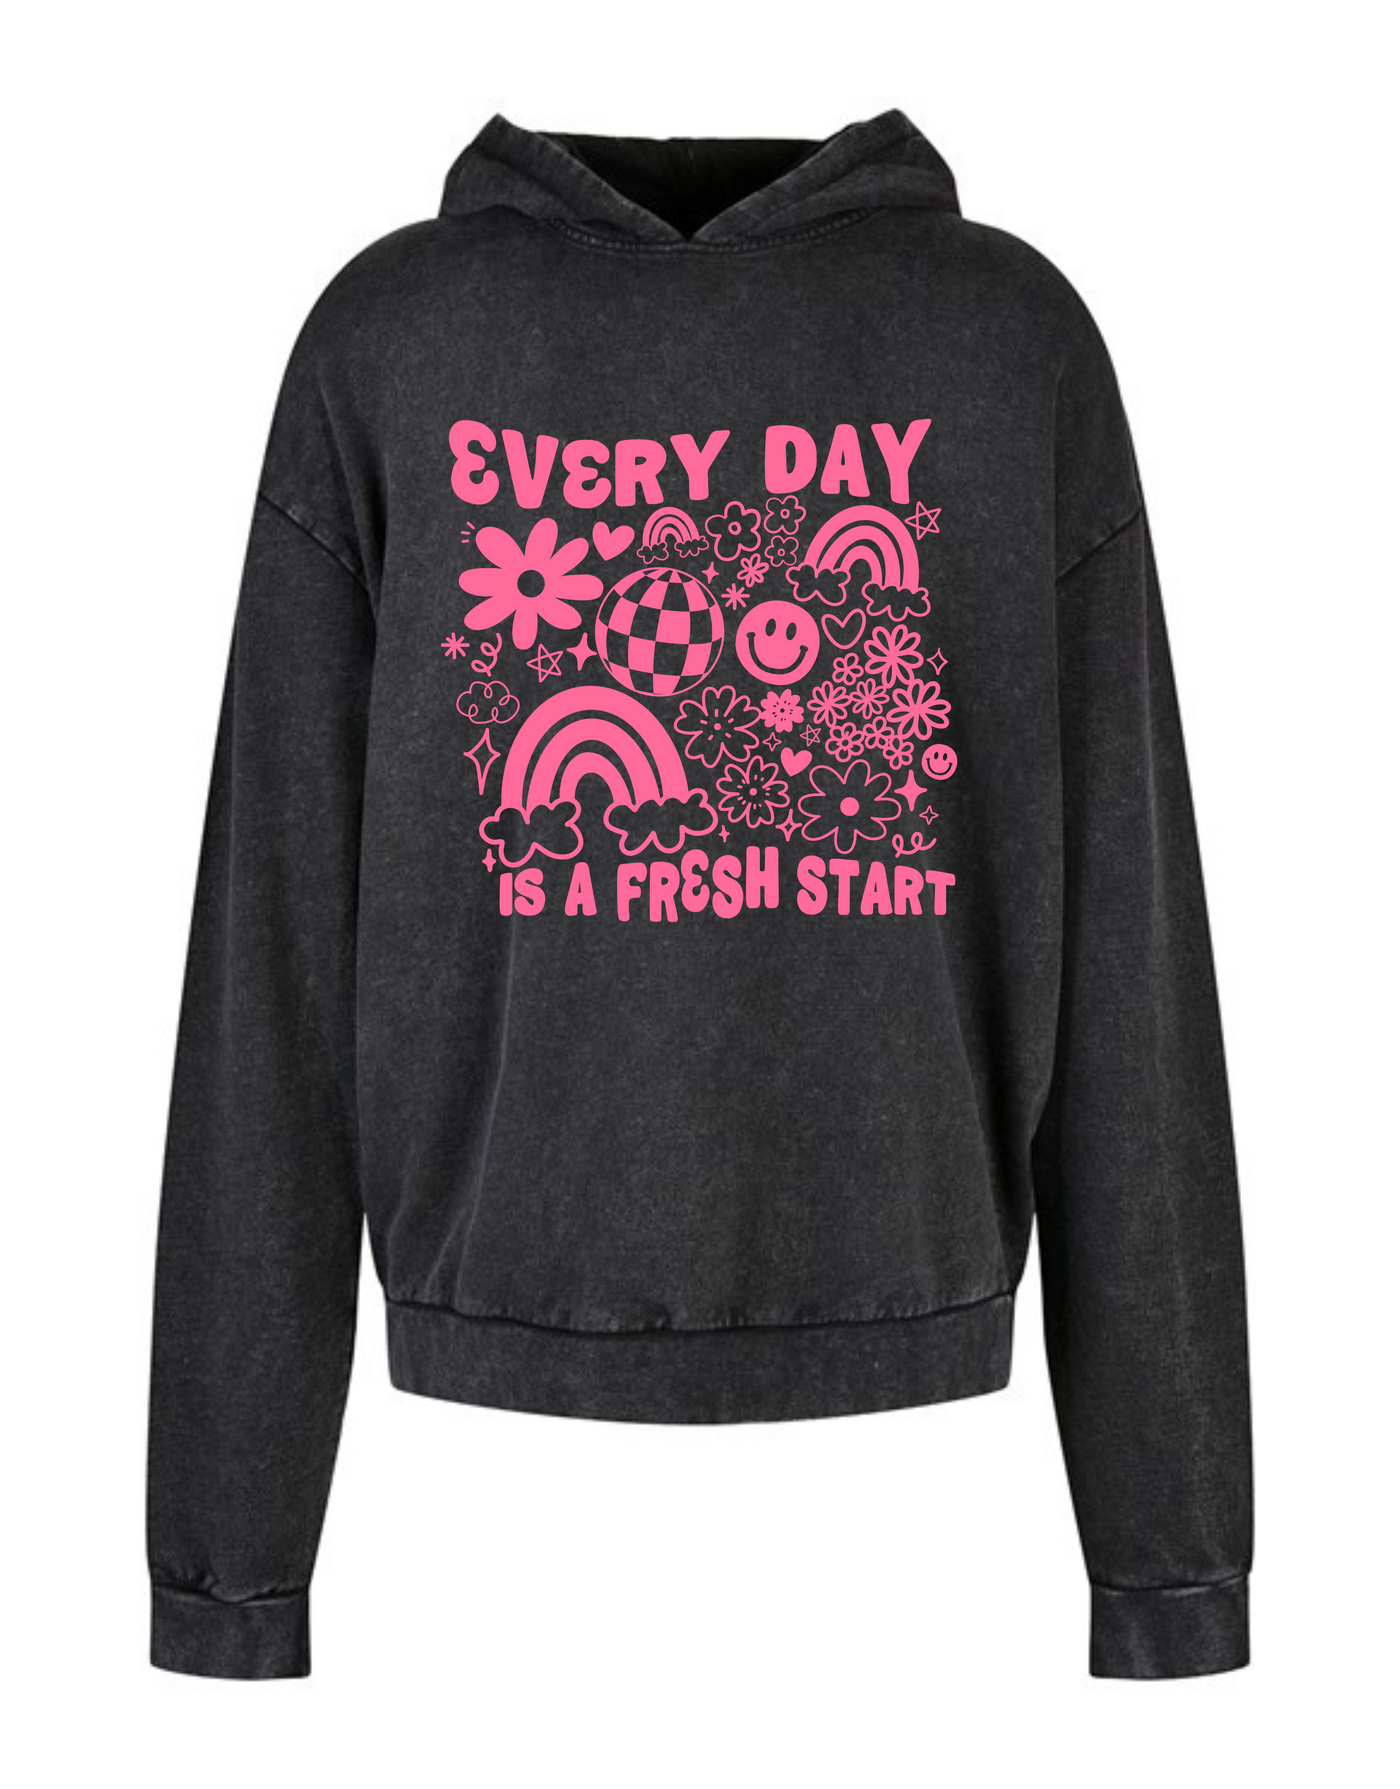 Black "Every Day Is A Fresh Start" Acid Wash Oversized Hoodie